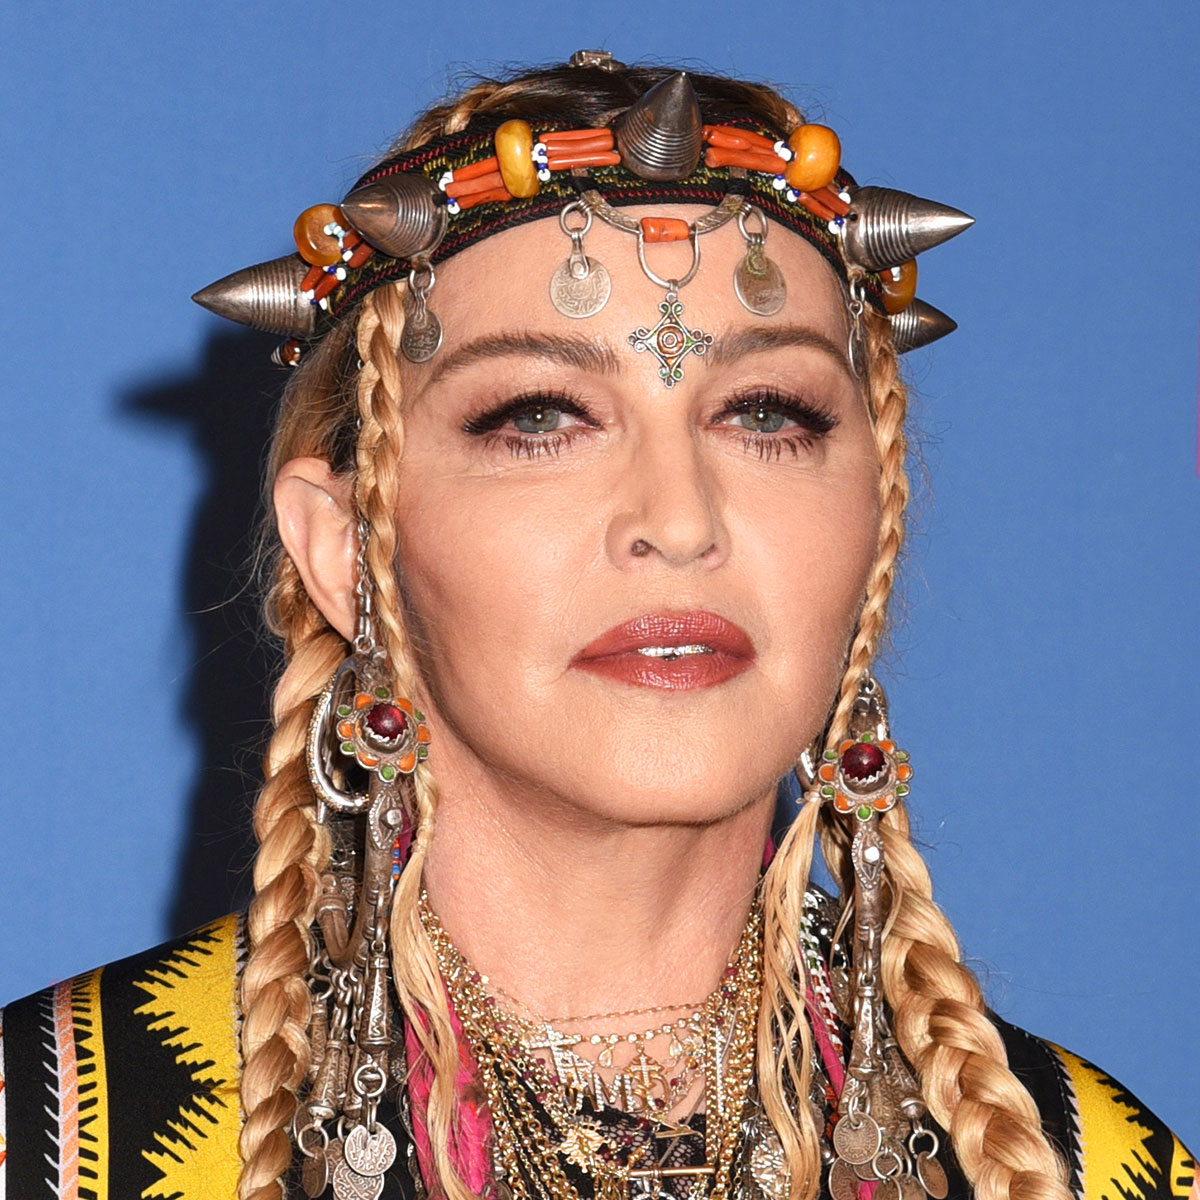 Madonna Looks 'Unrecognizable' Now—A Plastic Surgeon Weighs In